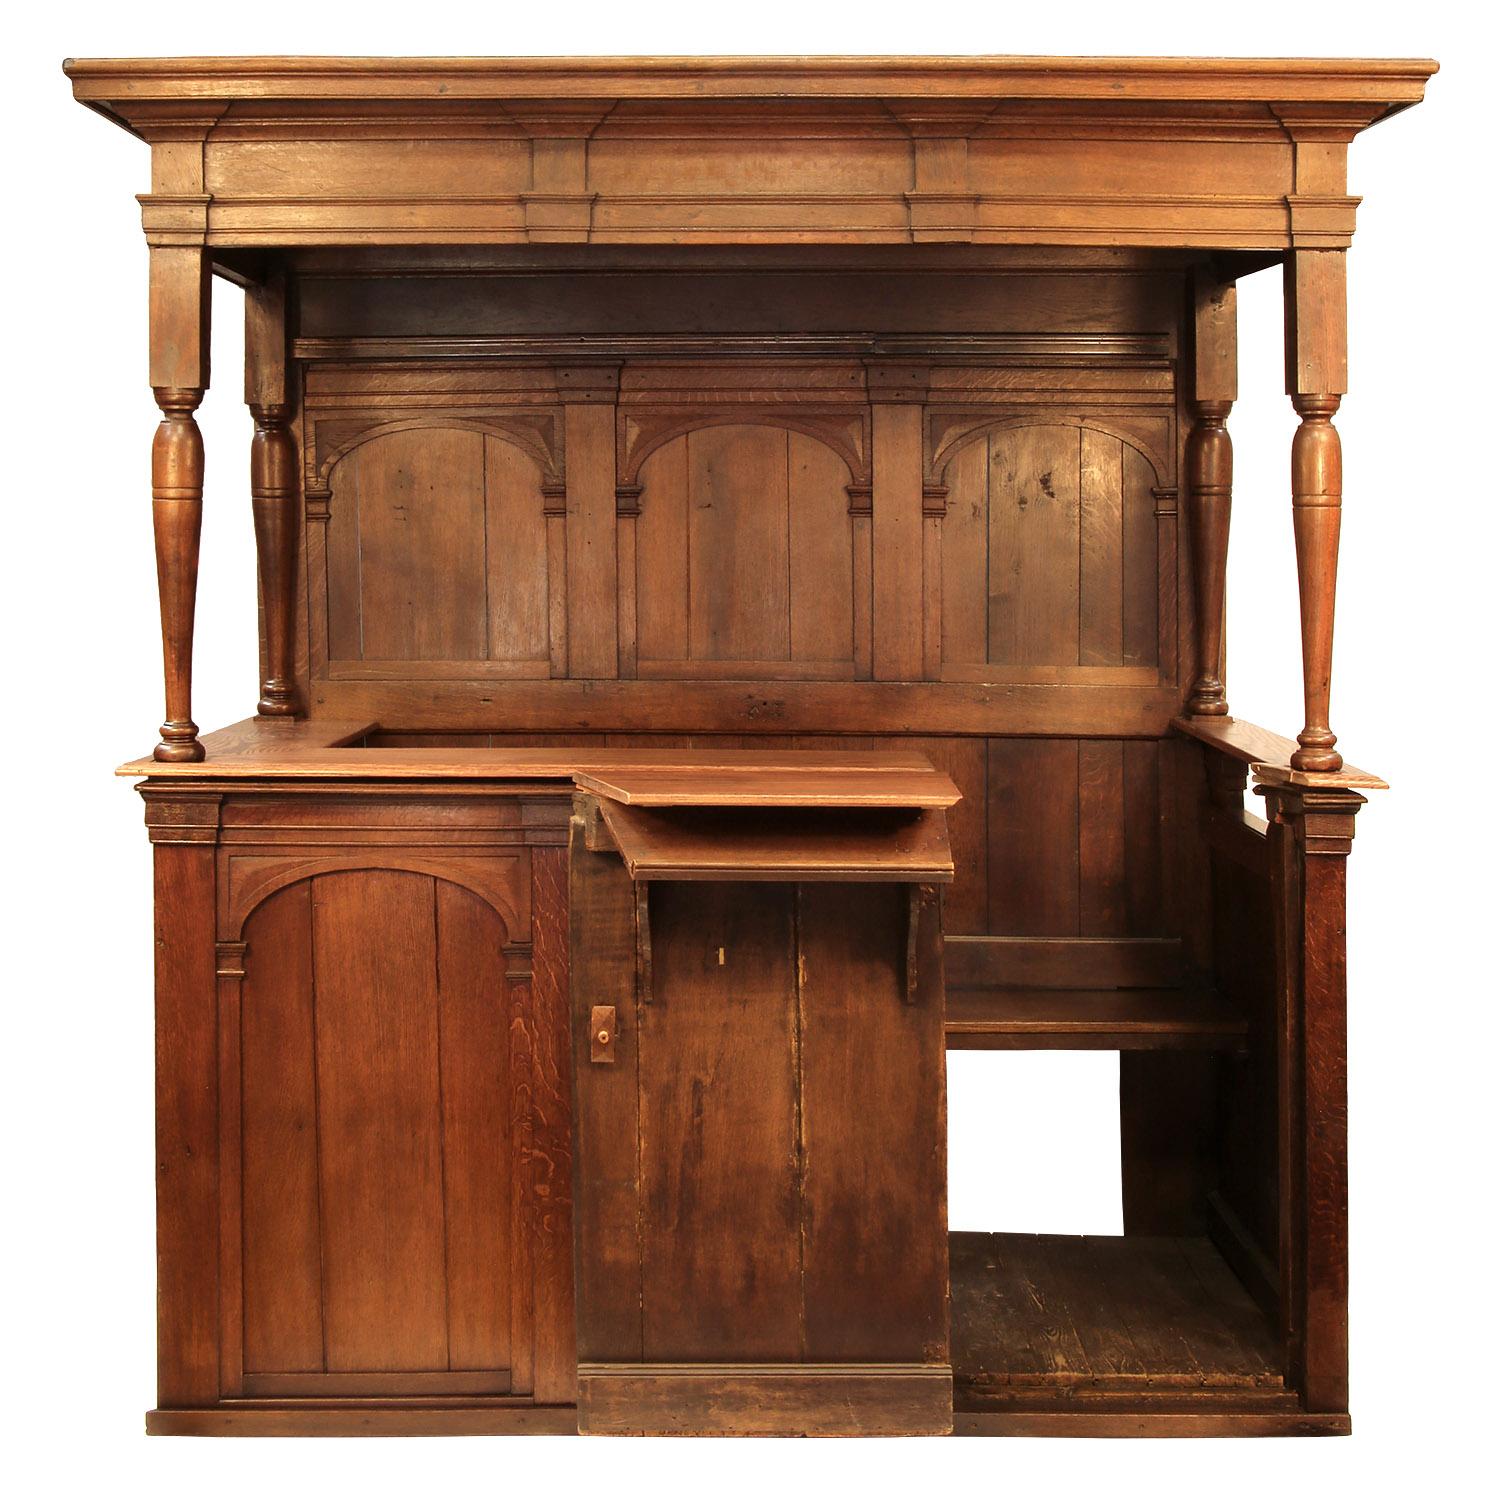 17th century large Dutch oak private pew currently converted into a bar

Originally from a church in Amsterdam. The enclosure would have been used by a noble family and probably had curtains for privacy and warmth.

The access is via a door on